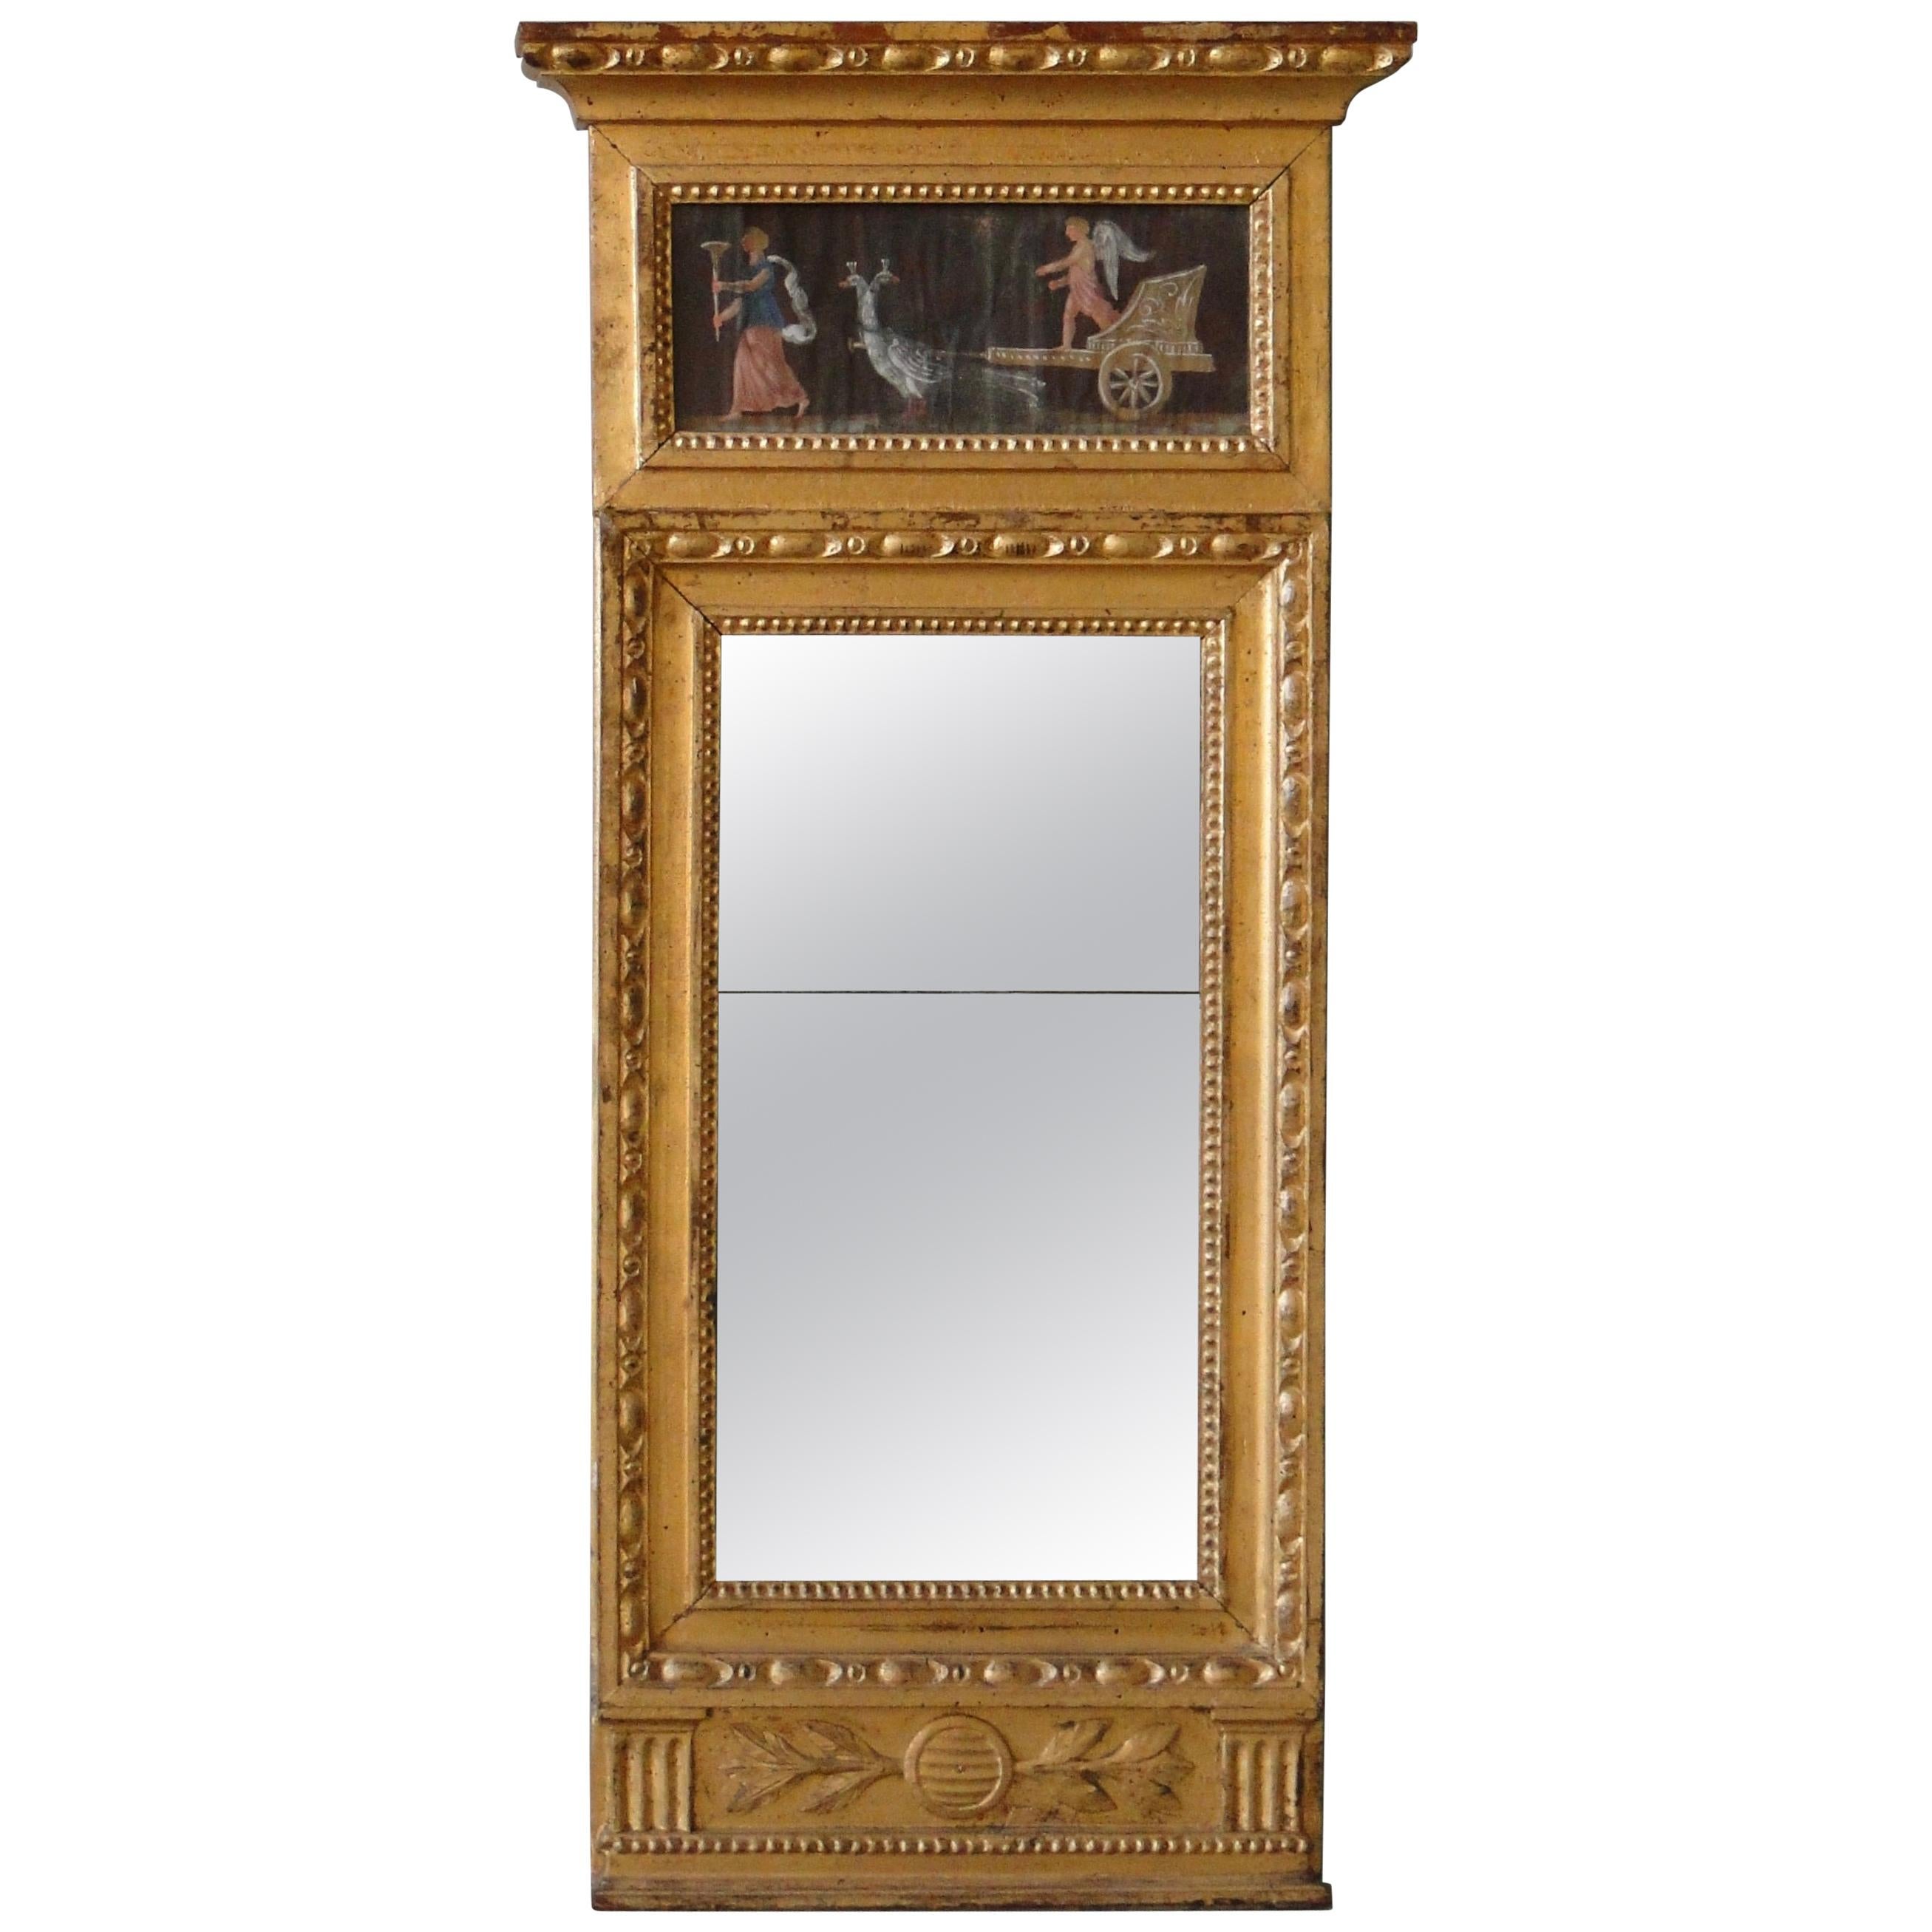  Late Gustavian Mirror with Painting on Paper Late 18th-Early 19th Century For Sale